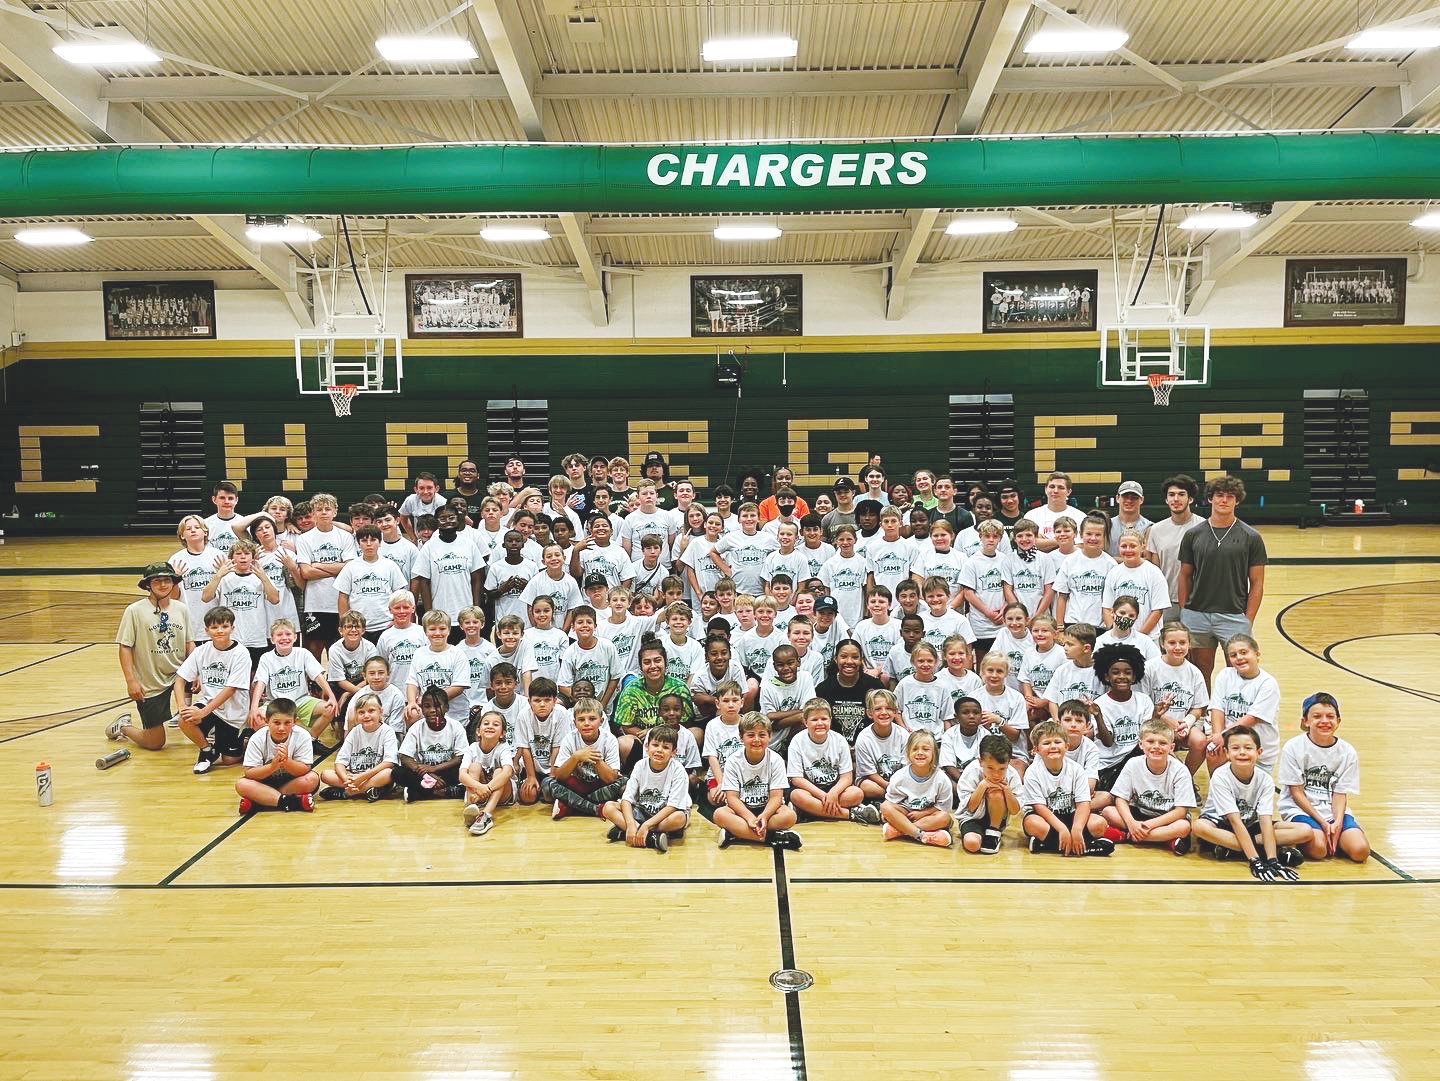 Attendees of the 2022 Northwood Sports Camp take a photo on the first day of camp inside of Northwood's gym on June 20. In total, nearly 120 campers signed up to participate in the 4-day camp centered around basketball and football.